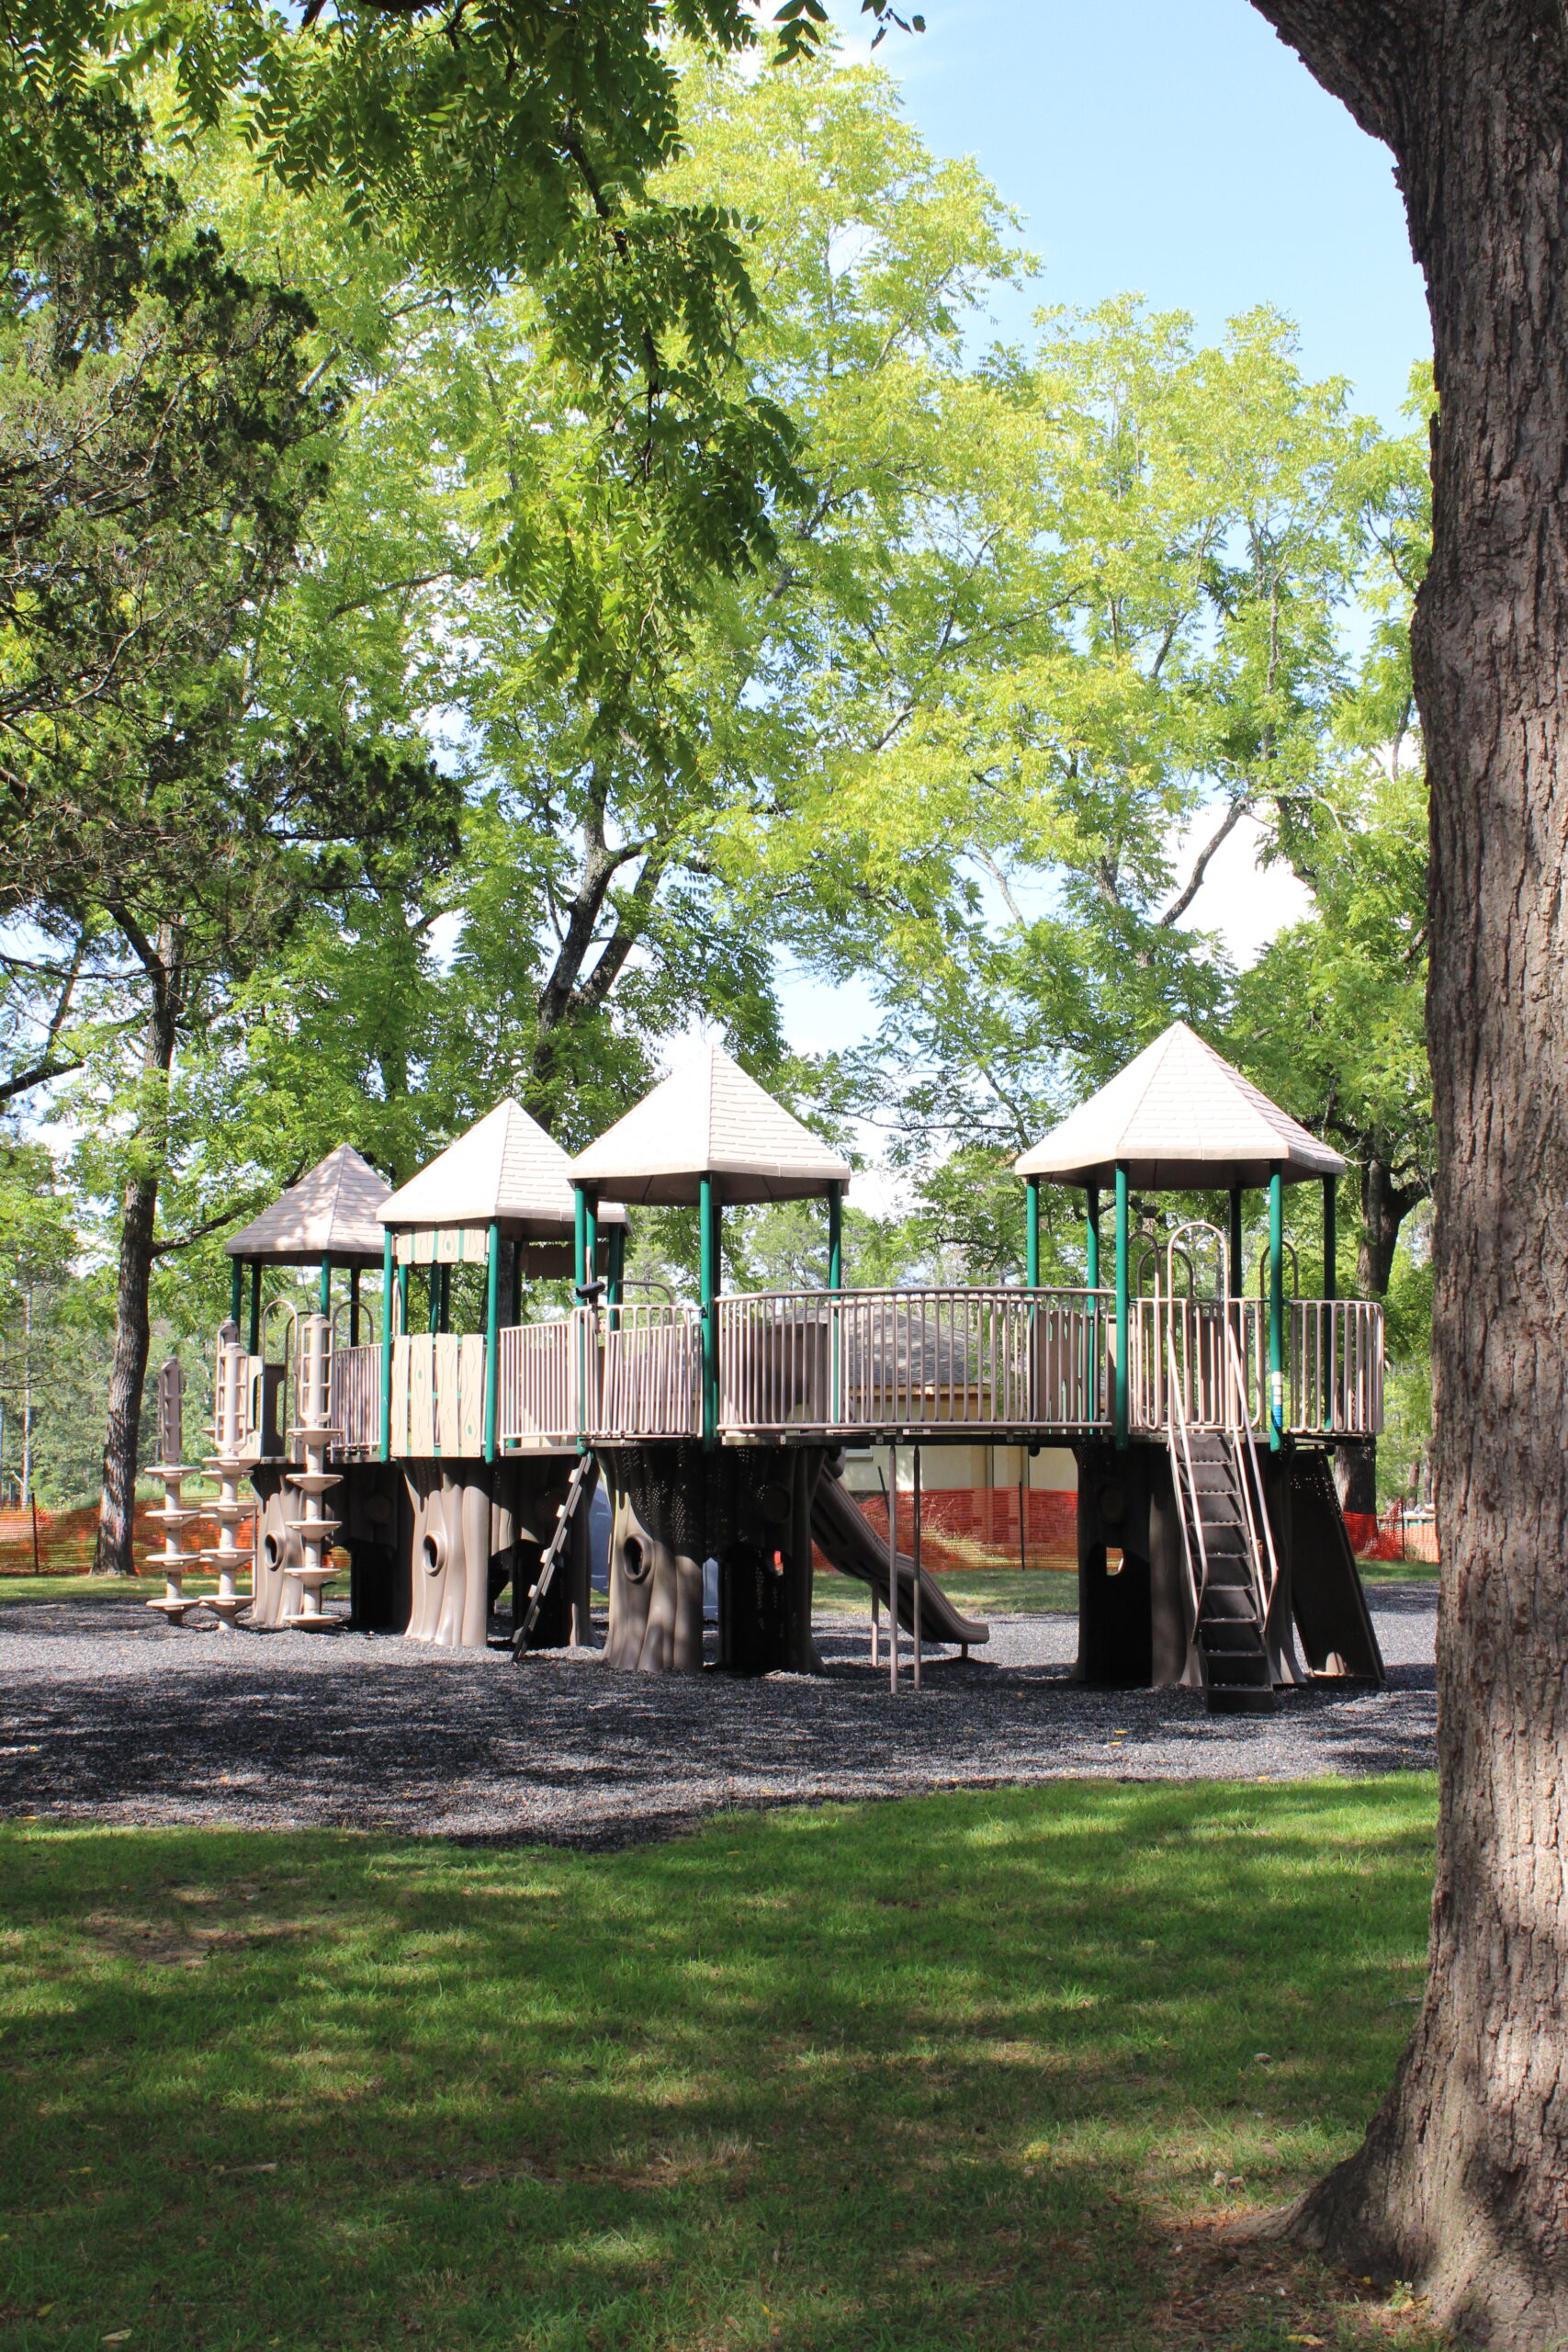 Back Estell Manor Park Playgrounds in Mays Landing NJ - TALL image - Treehouse playground